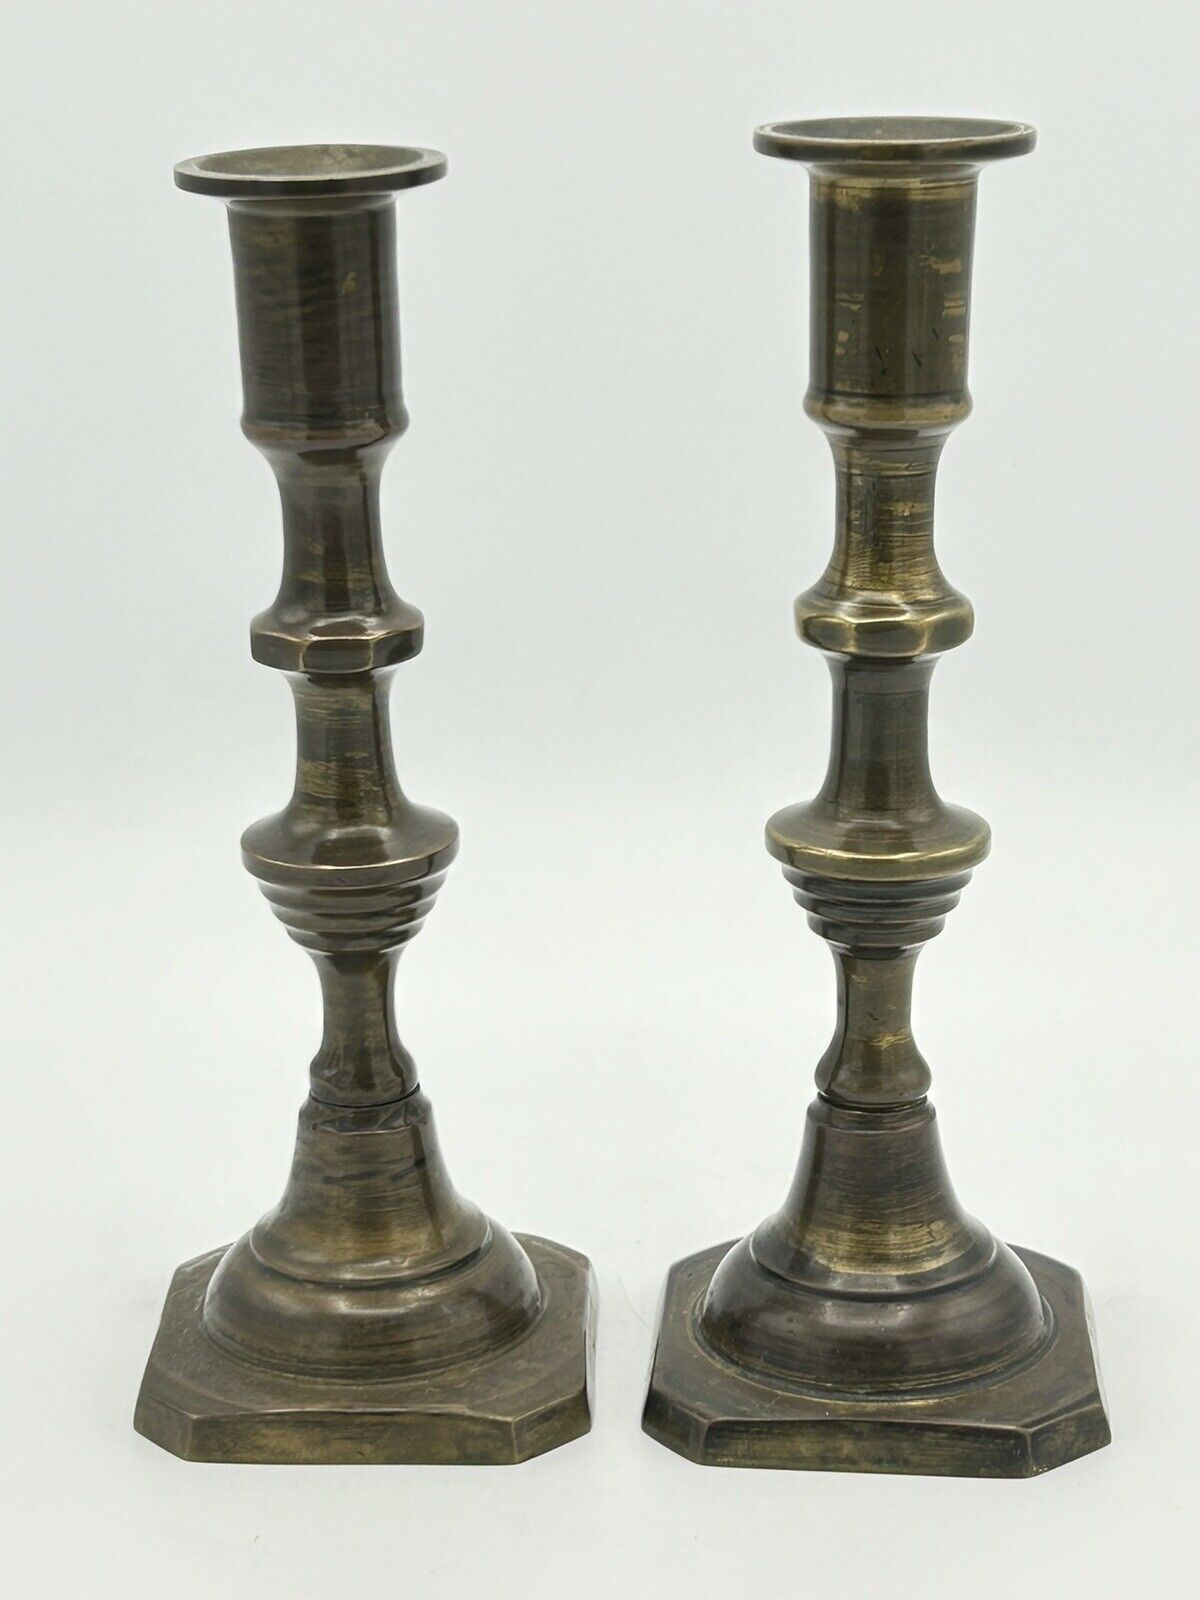 Vintage Brass Candlestick Holders Set Of 2 Made In India 8” Great Patina